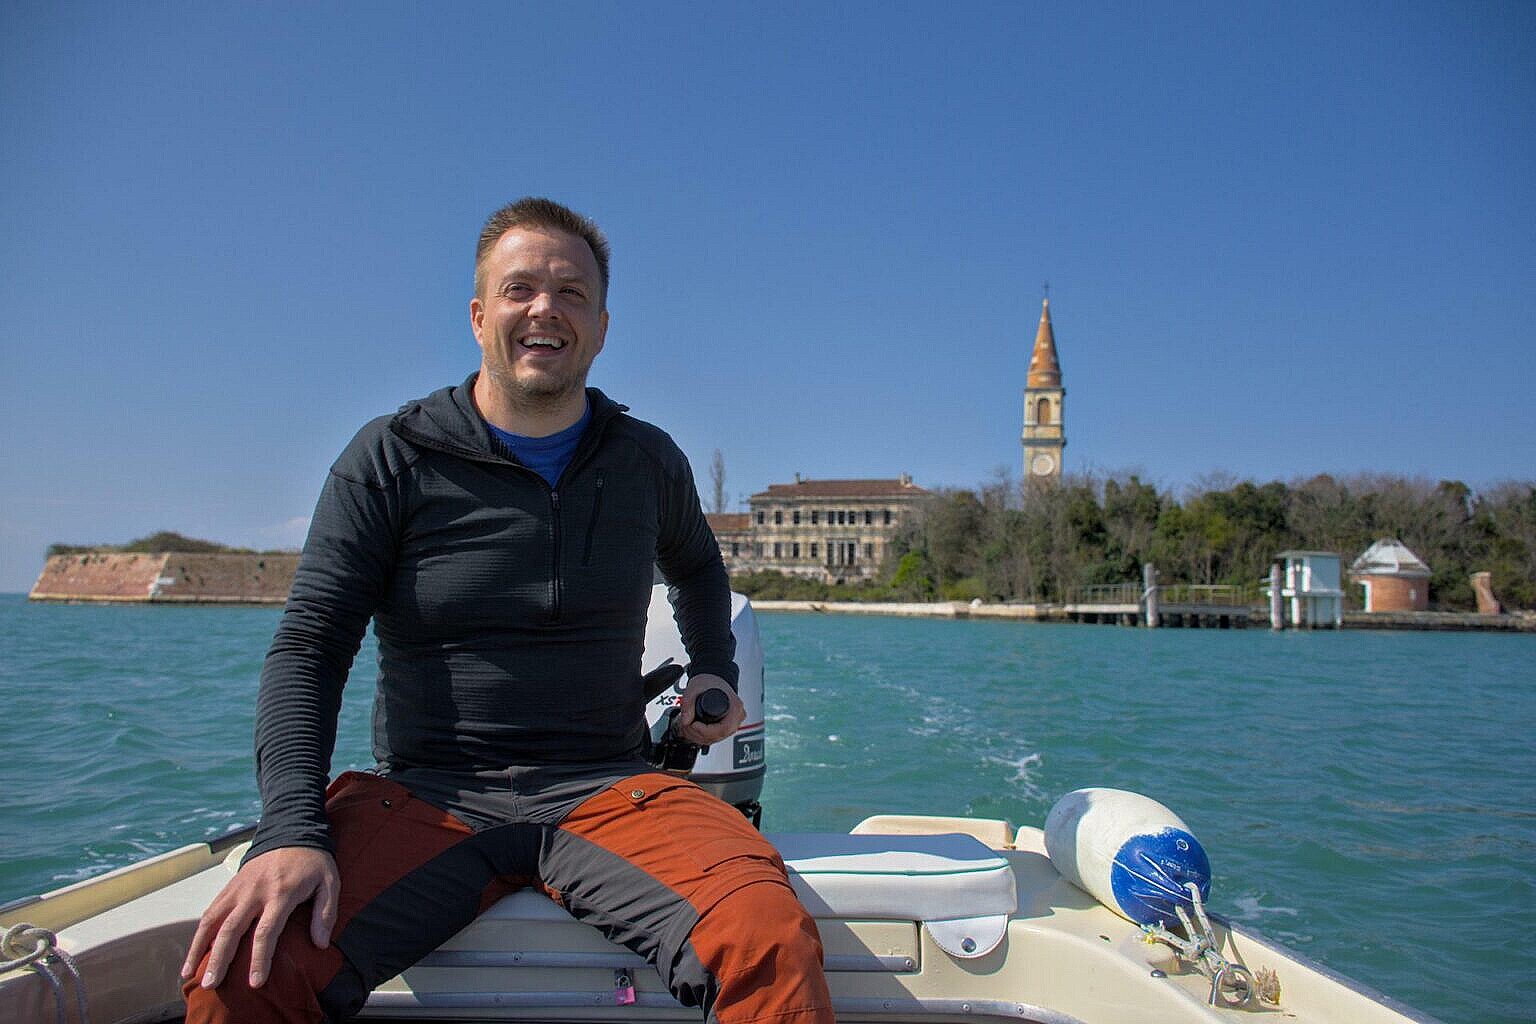 The only way to get to Poveglia is having a boat